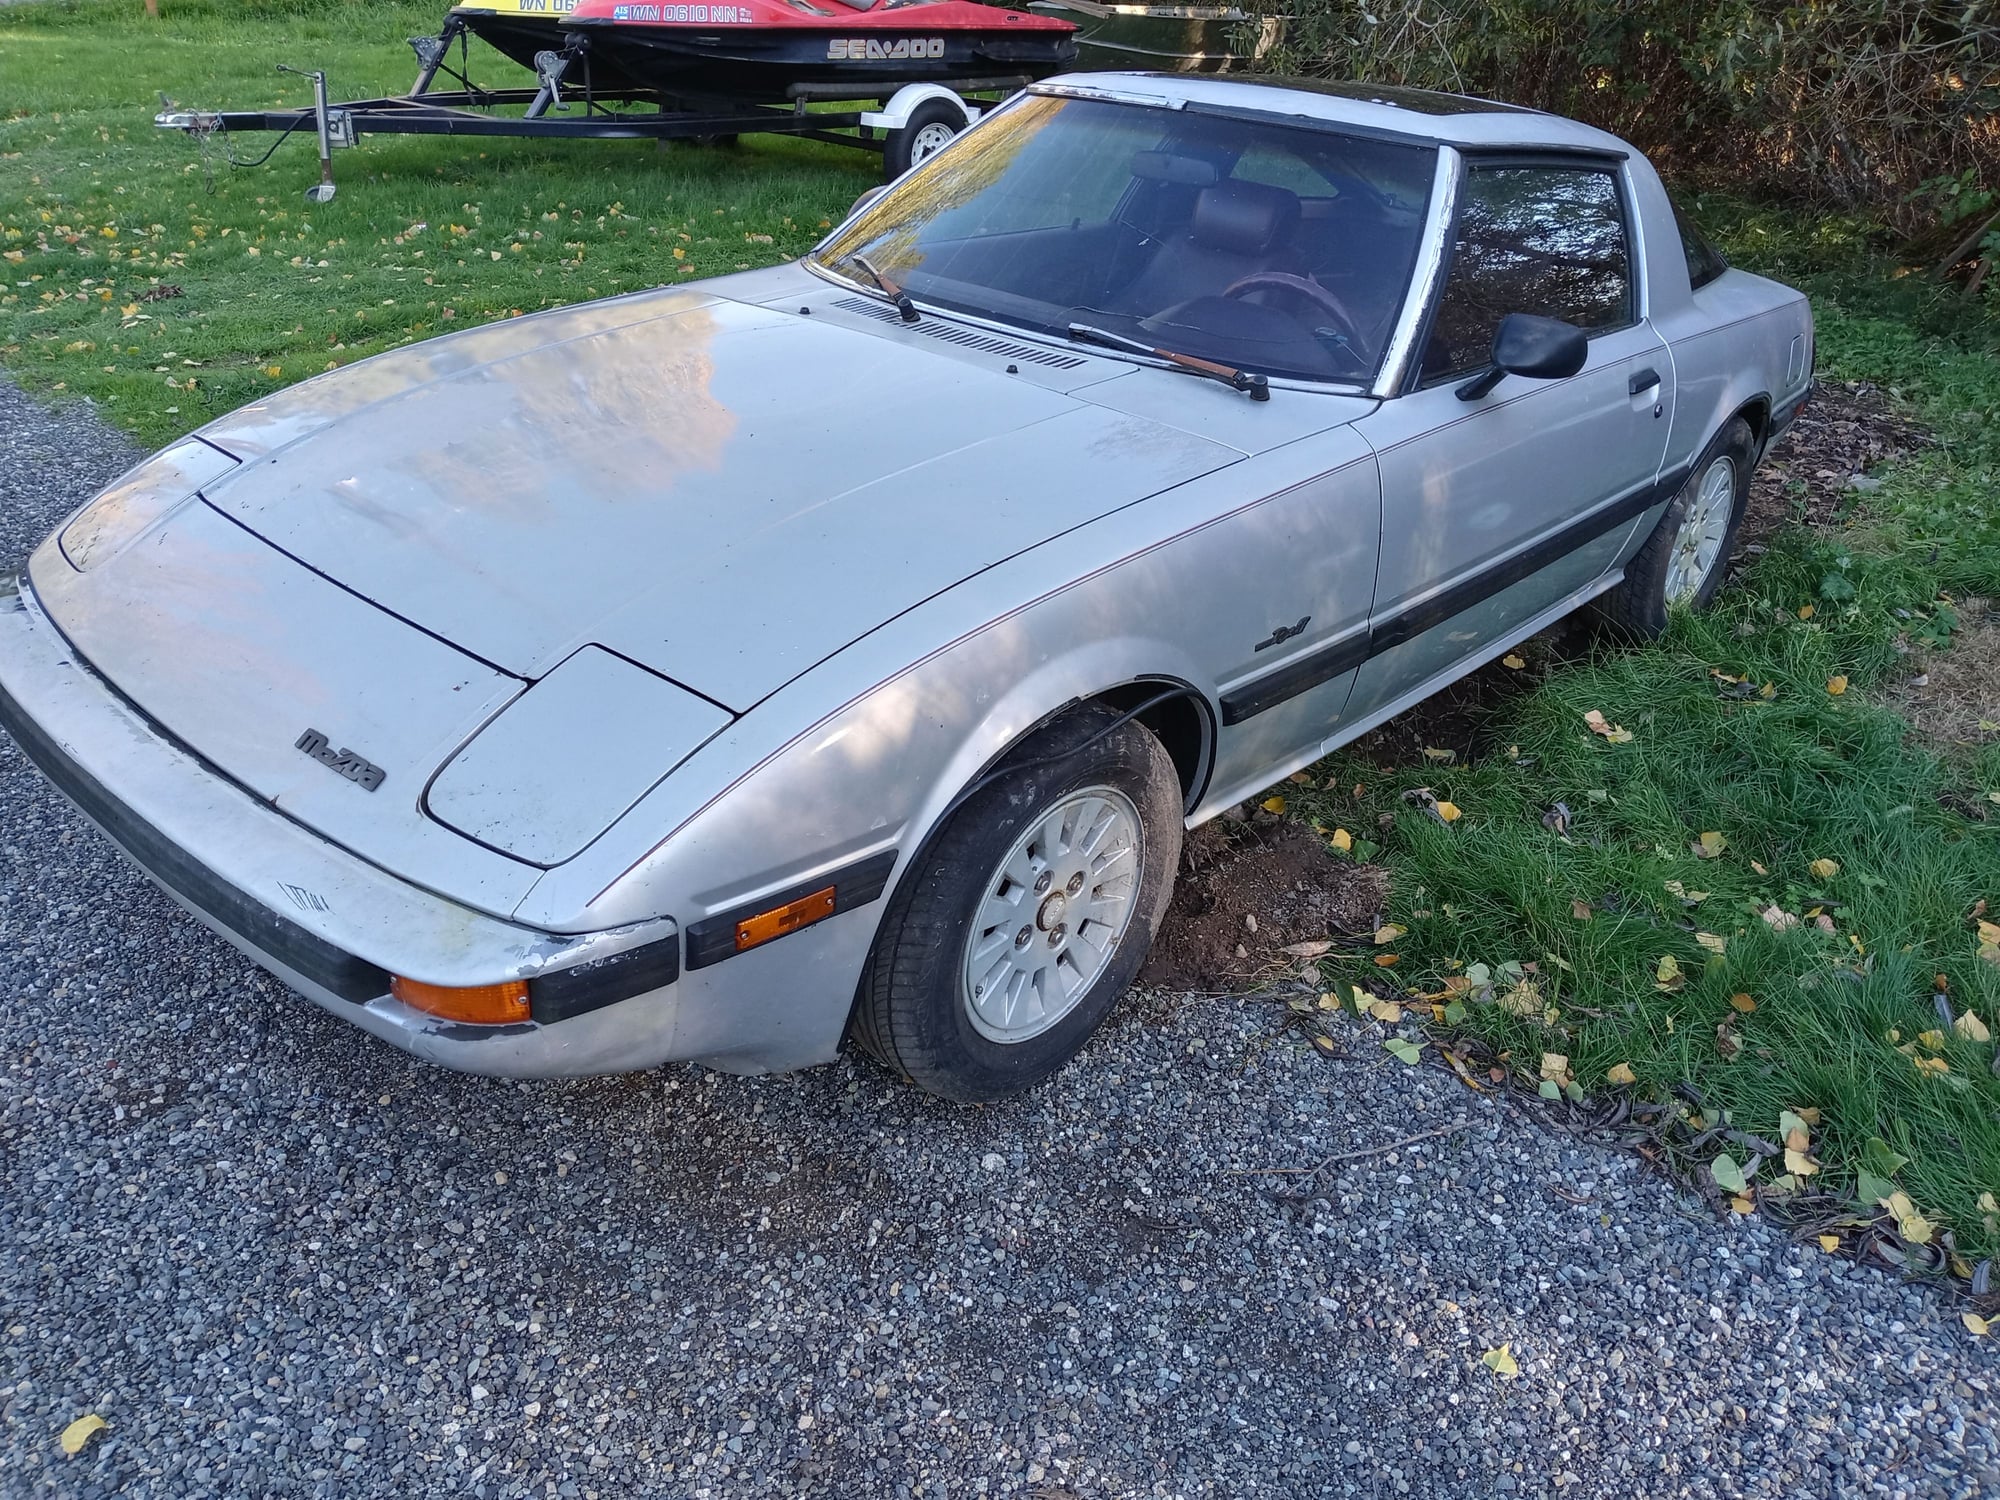 1985 Mazda RX-7 - 1985 S5 T2 Swapped (Bad Engine) - Used - VIN JM1FB331XF0897282 - 126,000 Miles - Other - 2WD - Manual - Hatchback - Silver - Bellingham, WA 98226, United States